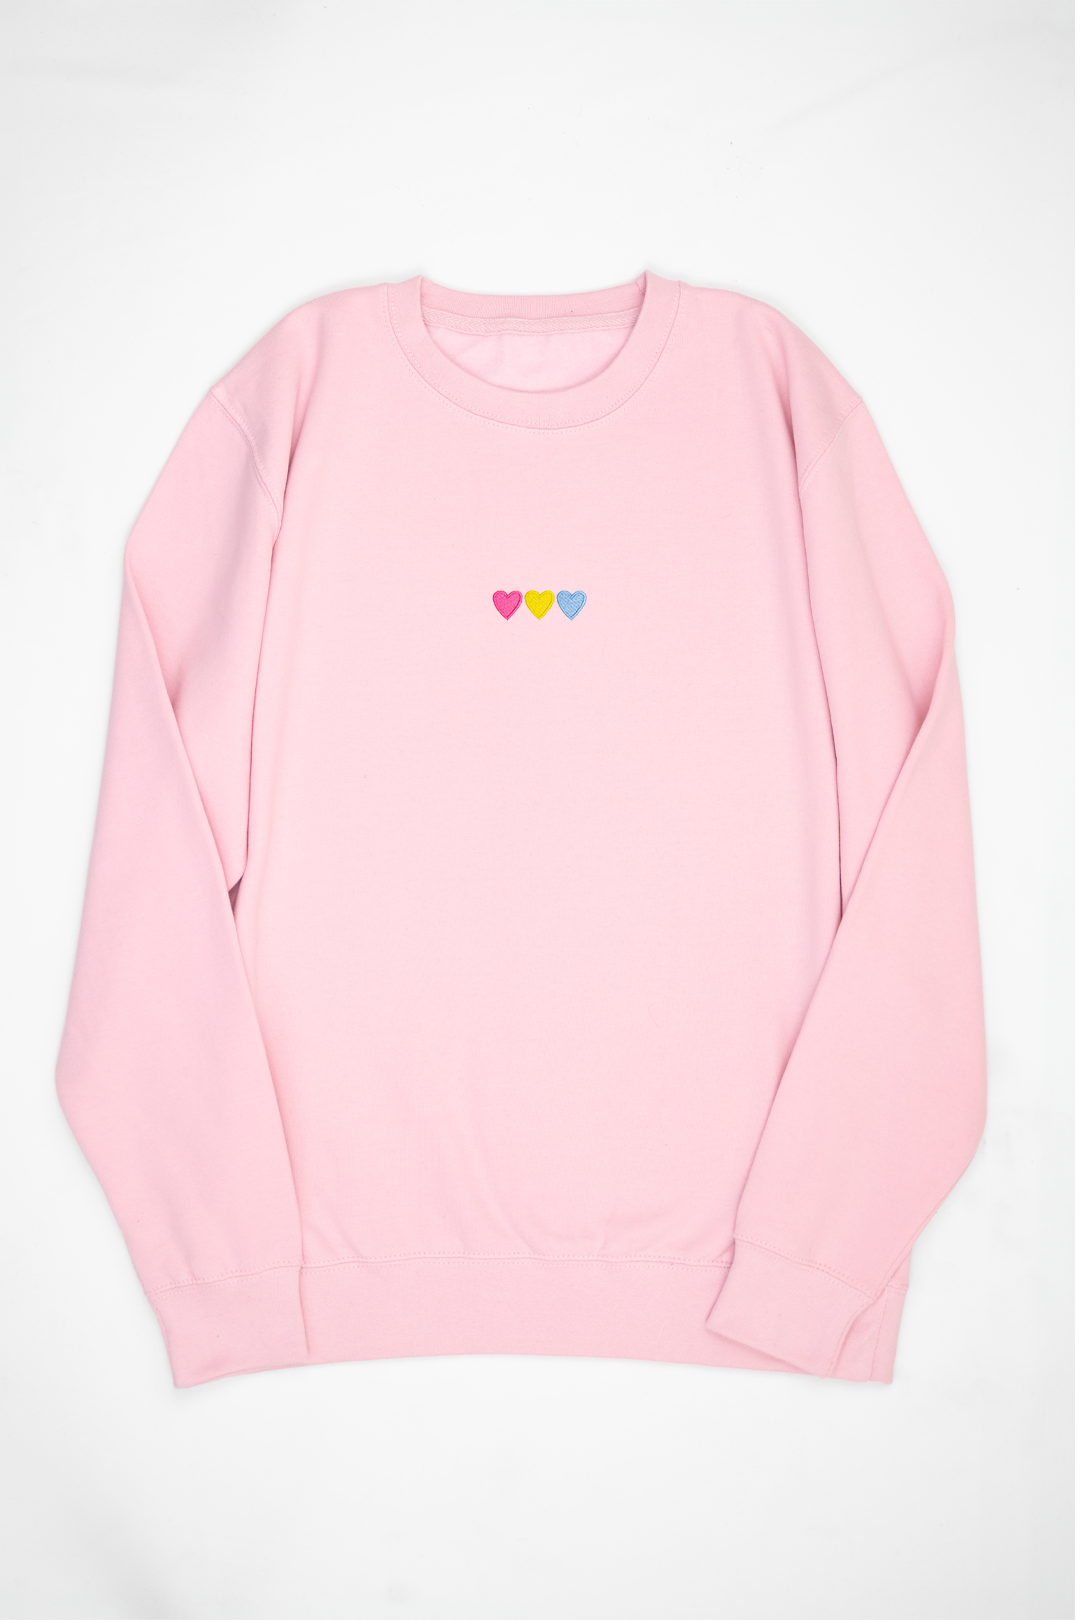 Embroidered Hearts Pansexual Sweat